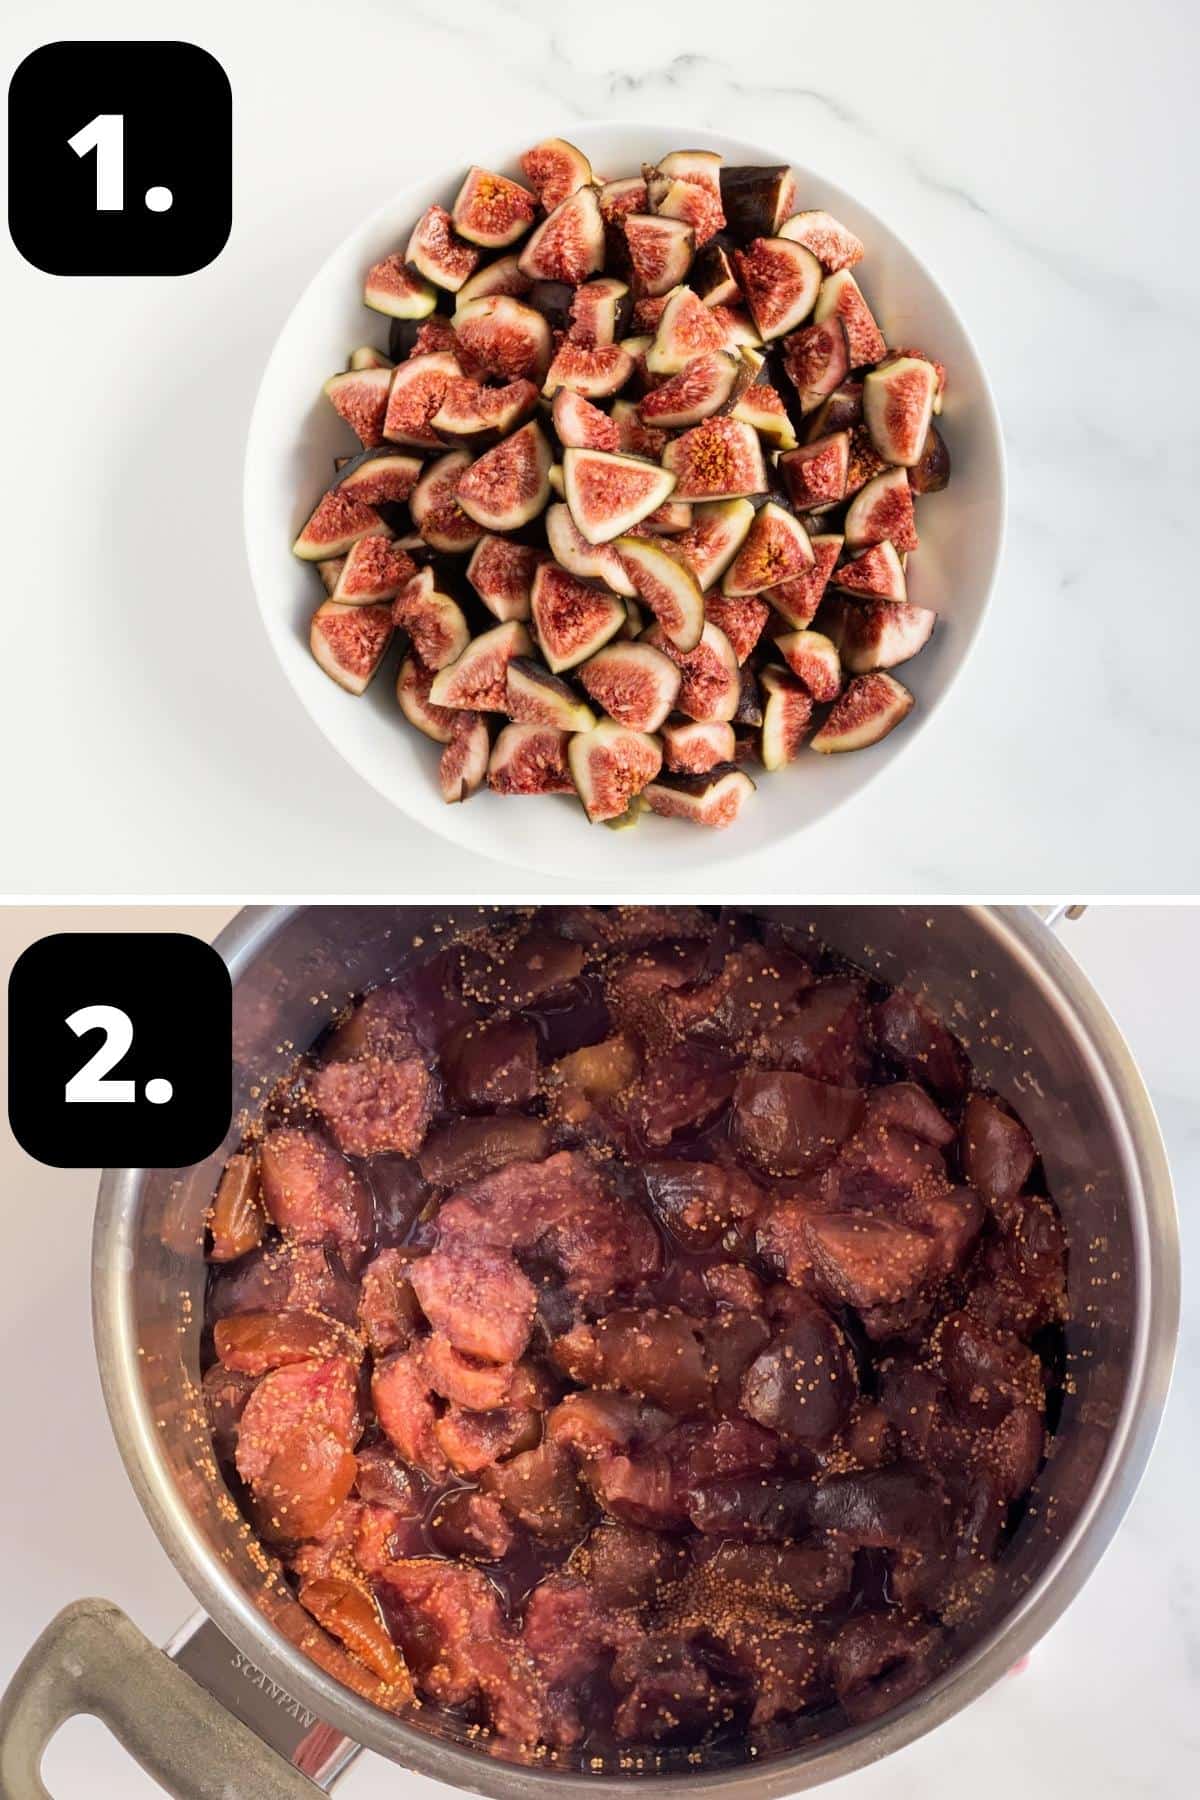 Steps 1-2 of preparing this recipe - a dish of the figs cut into small pieces and the cooked softened figs in a saucepan.